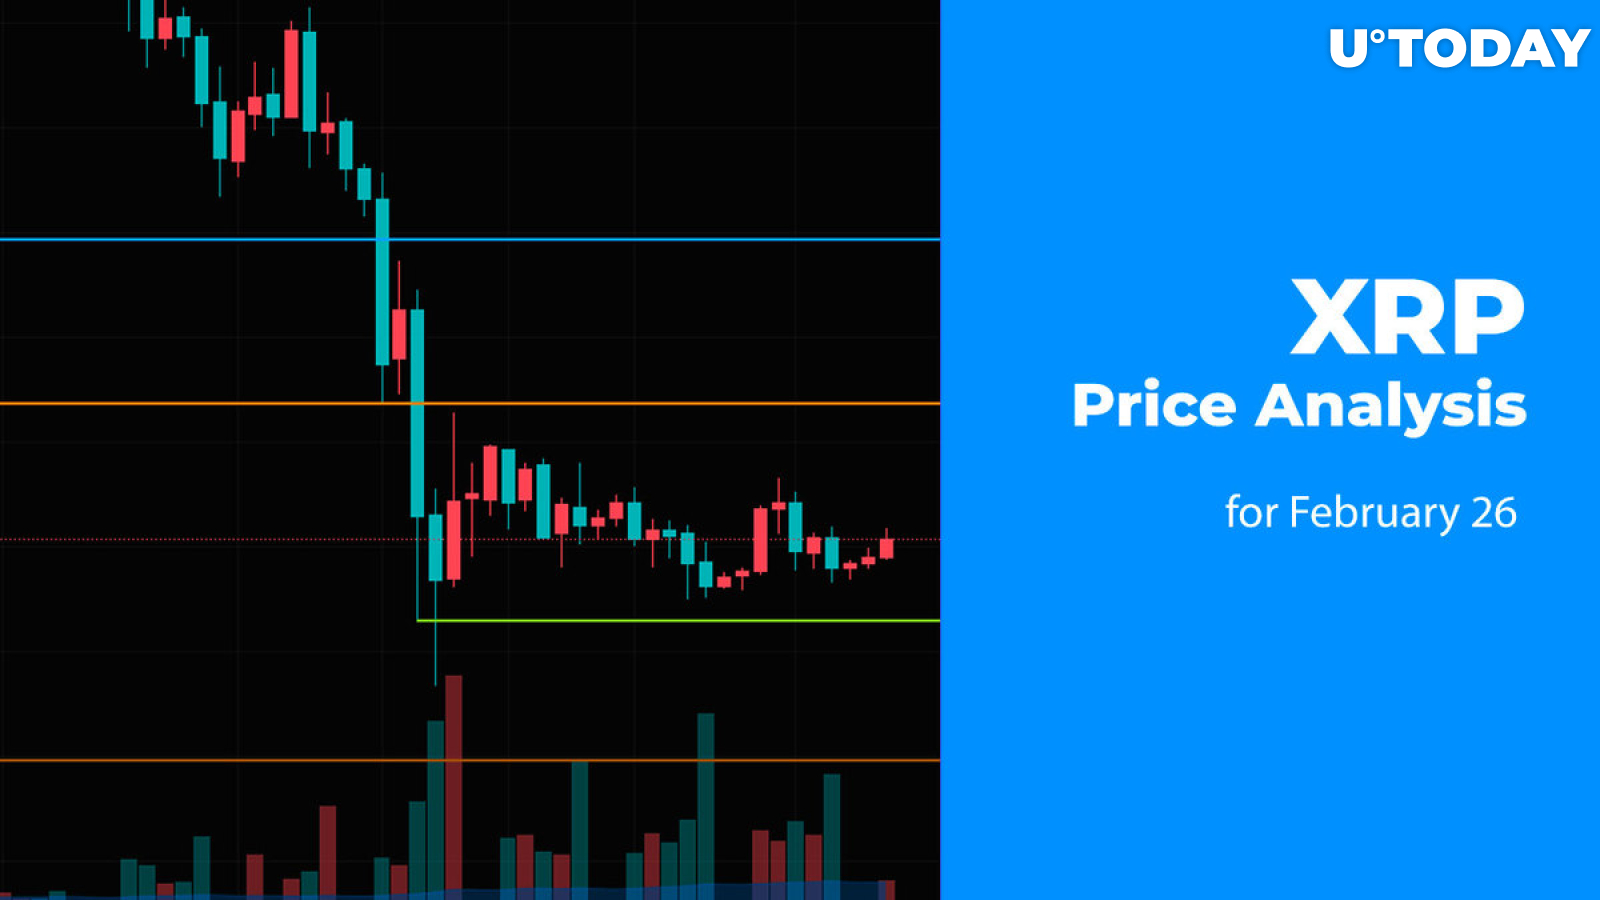 XRP Price Analysis for February 26